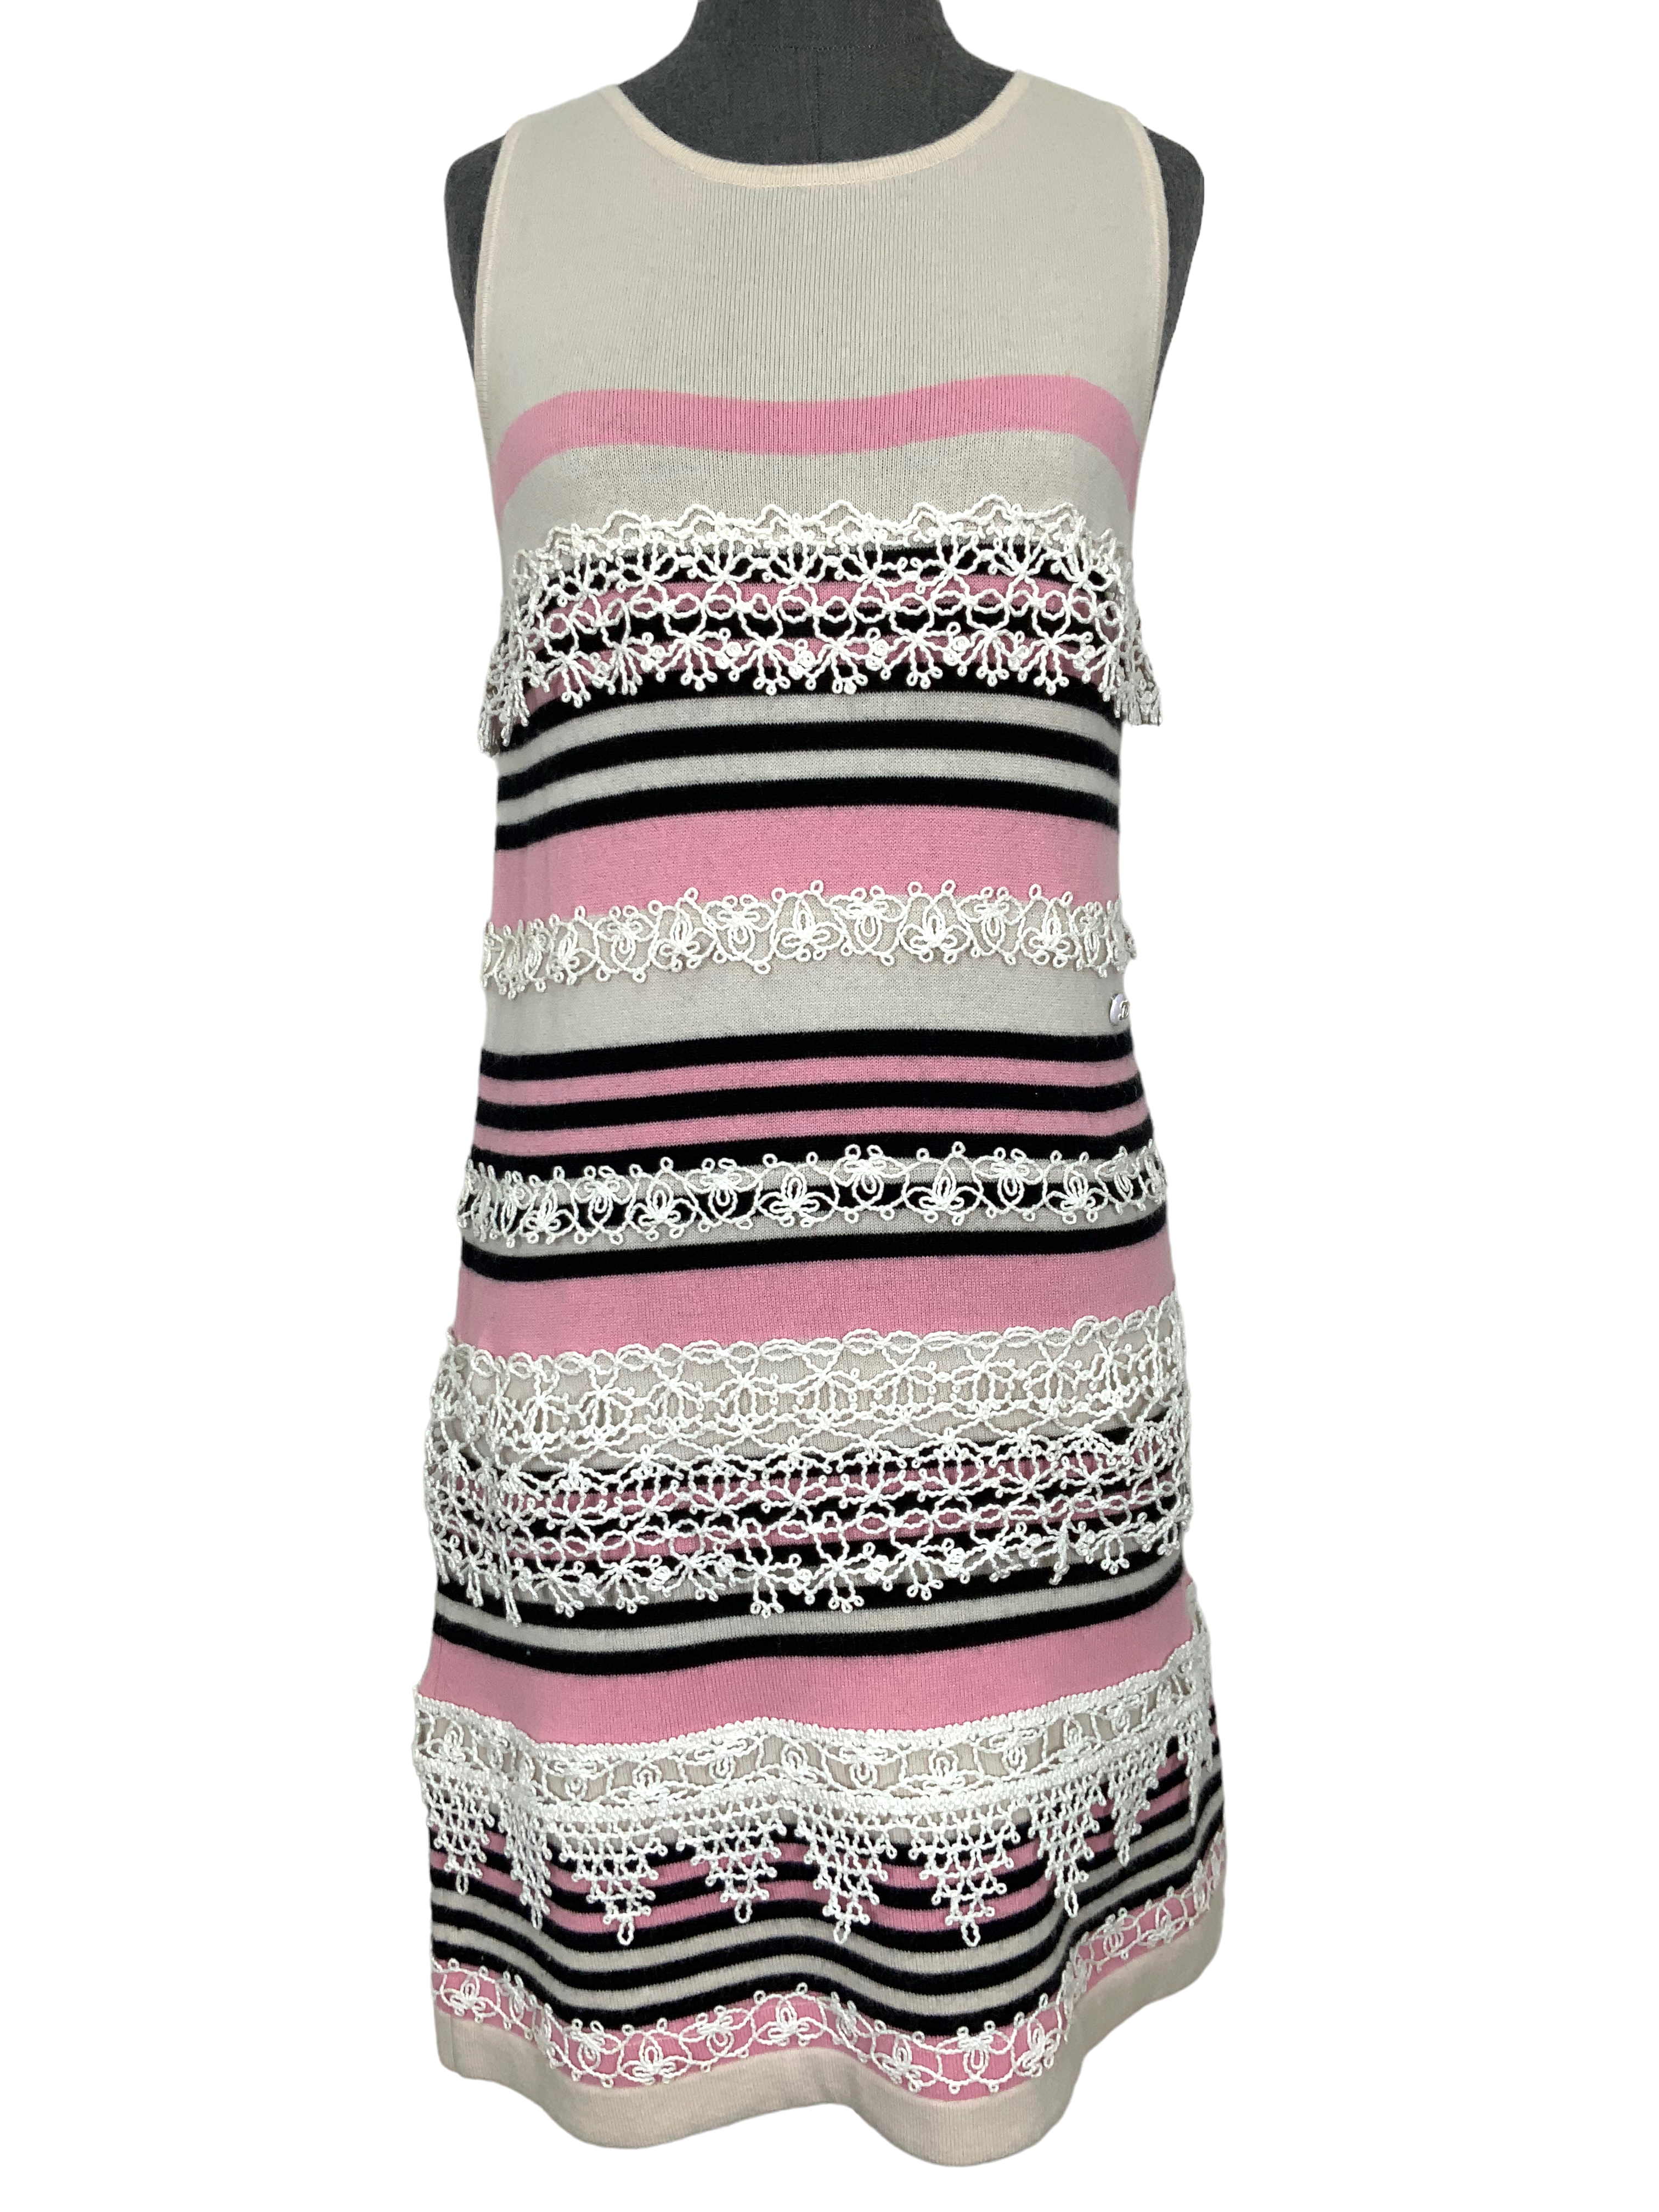 Chanel 11C Striped Cashmere Sleeveless Dress Size M - Consigned